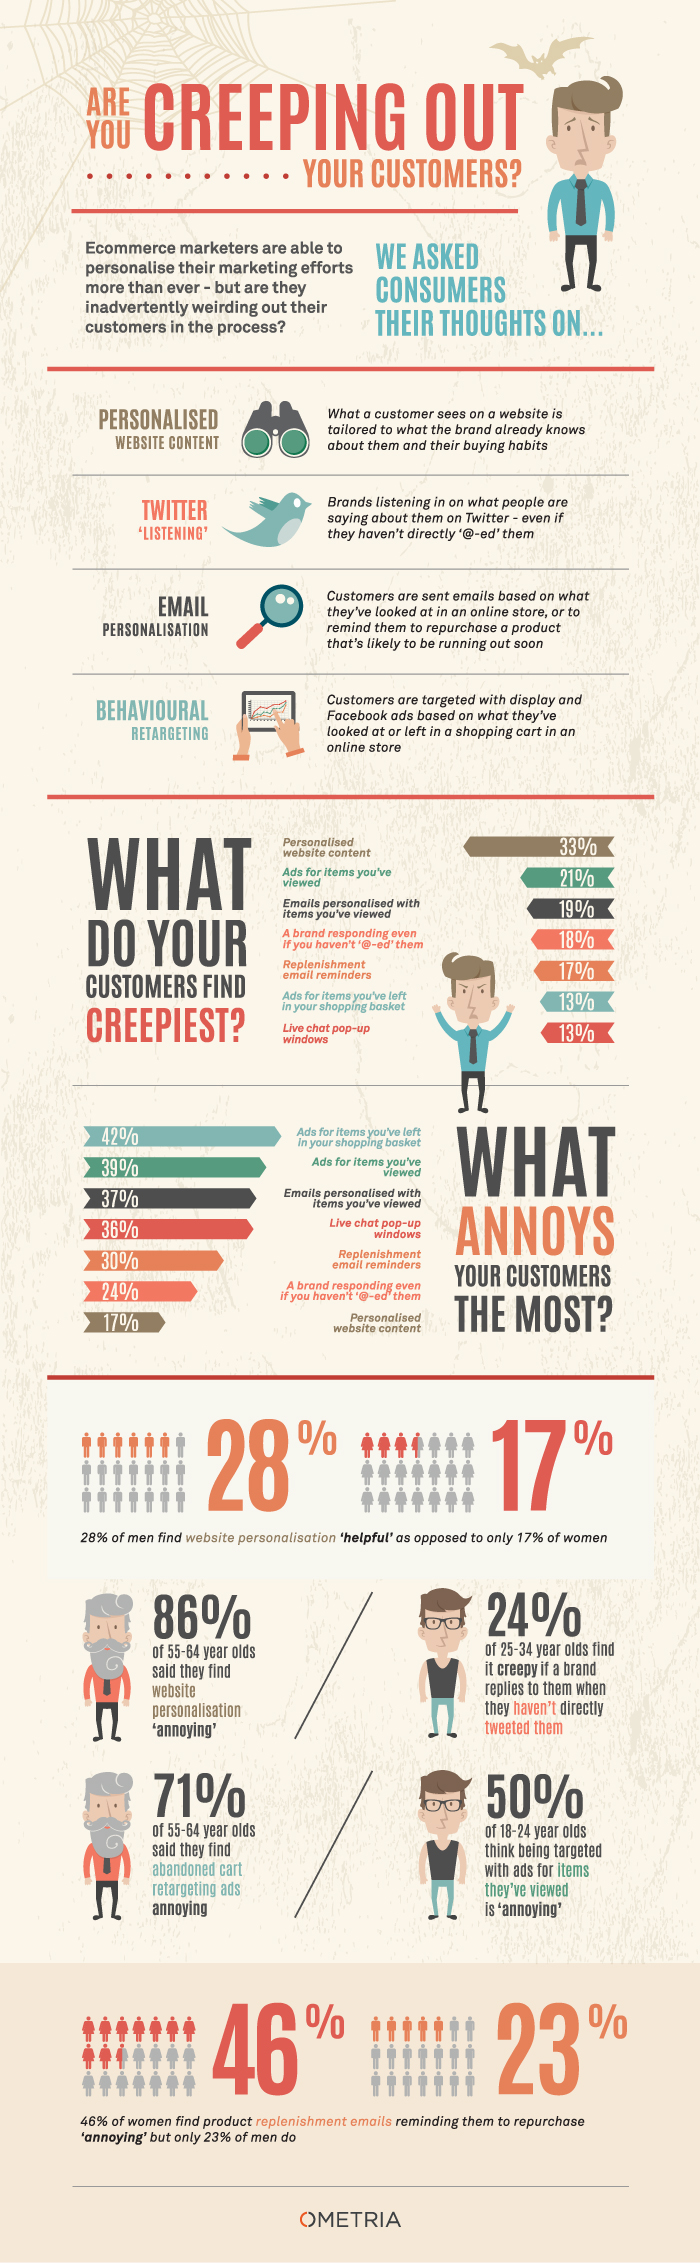 Are You Creeping Out Your Customers?